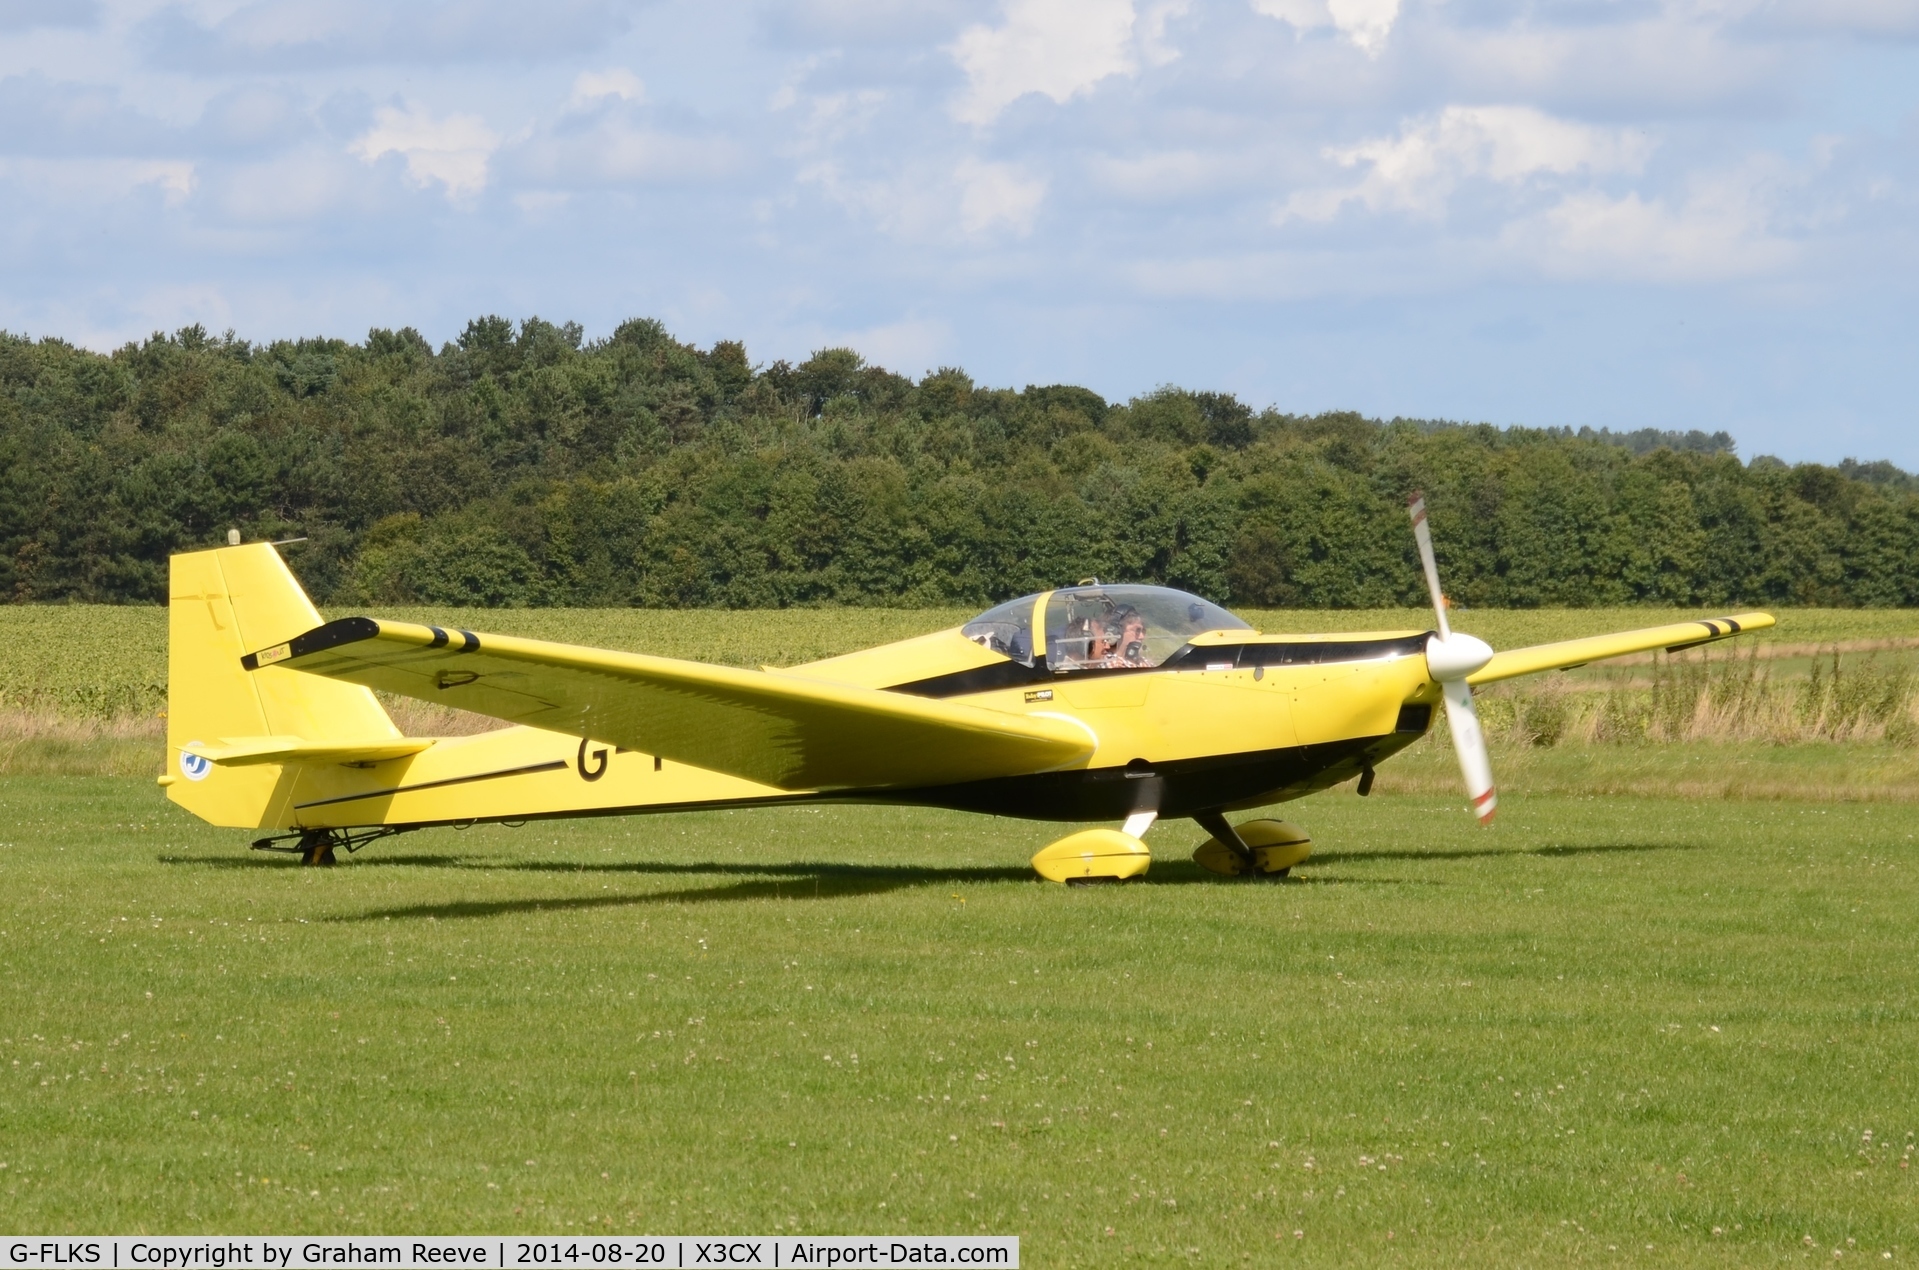 G-FLKS, 2000 Scheibe SF-25C Falke C/N 44662, About to depart from Northrepps.